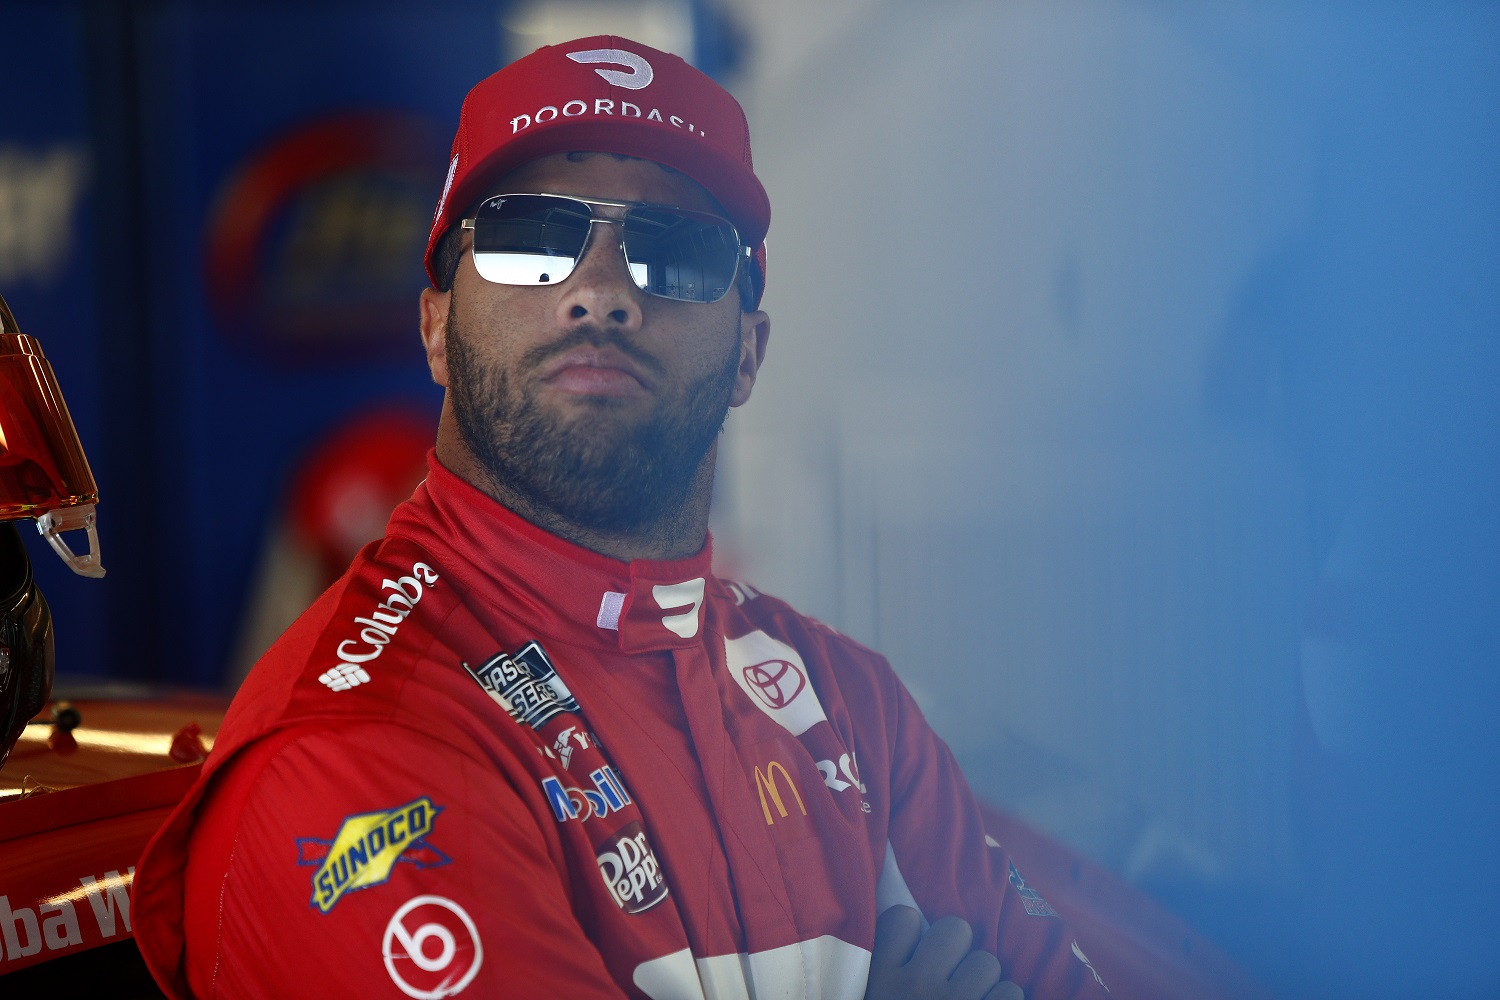 Bubba Wallace, driver of the No. 23 Toyota, waits in the garage area during practice for the NASCAR Cup Series Championship at Phoenix Raceway on Nov. 5, 2021.